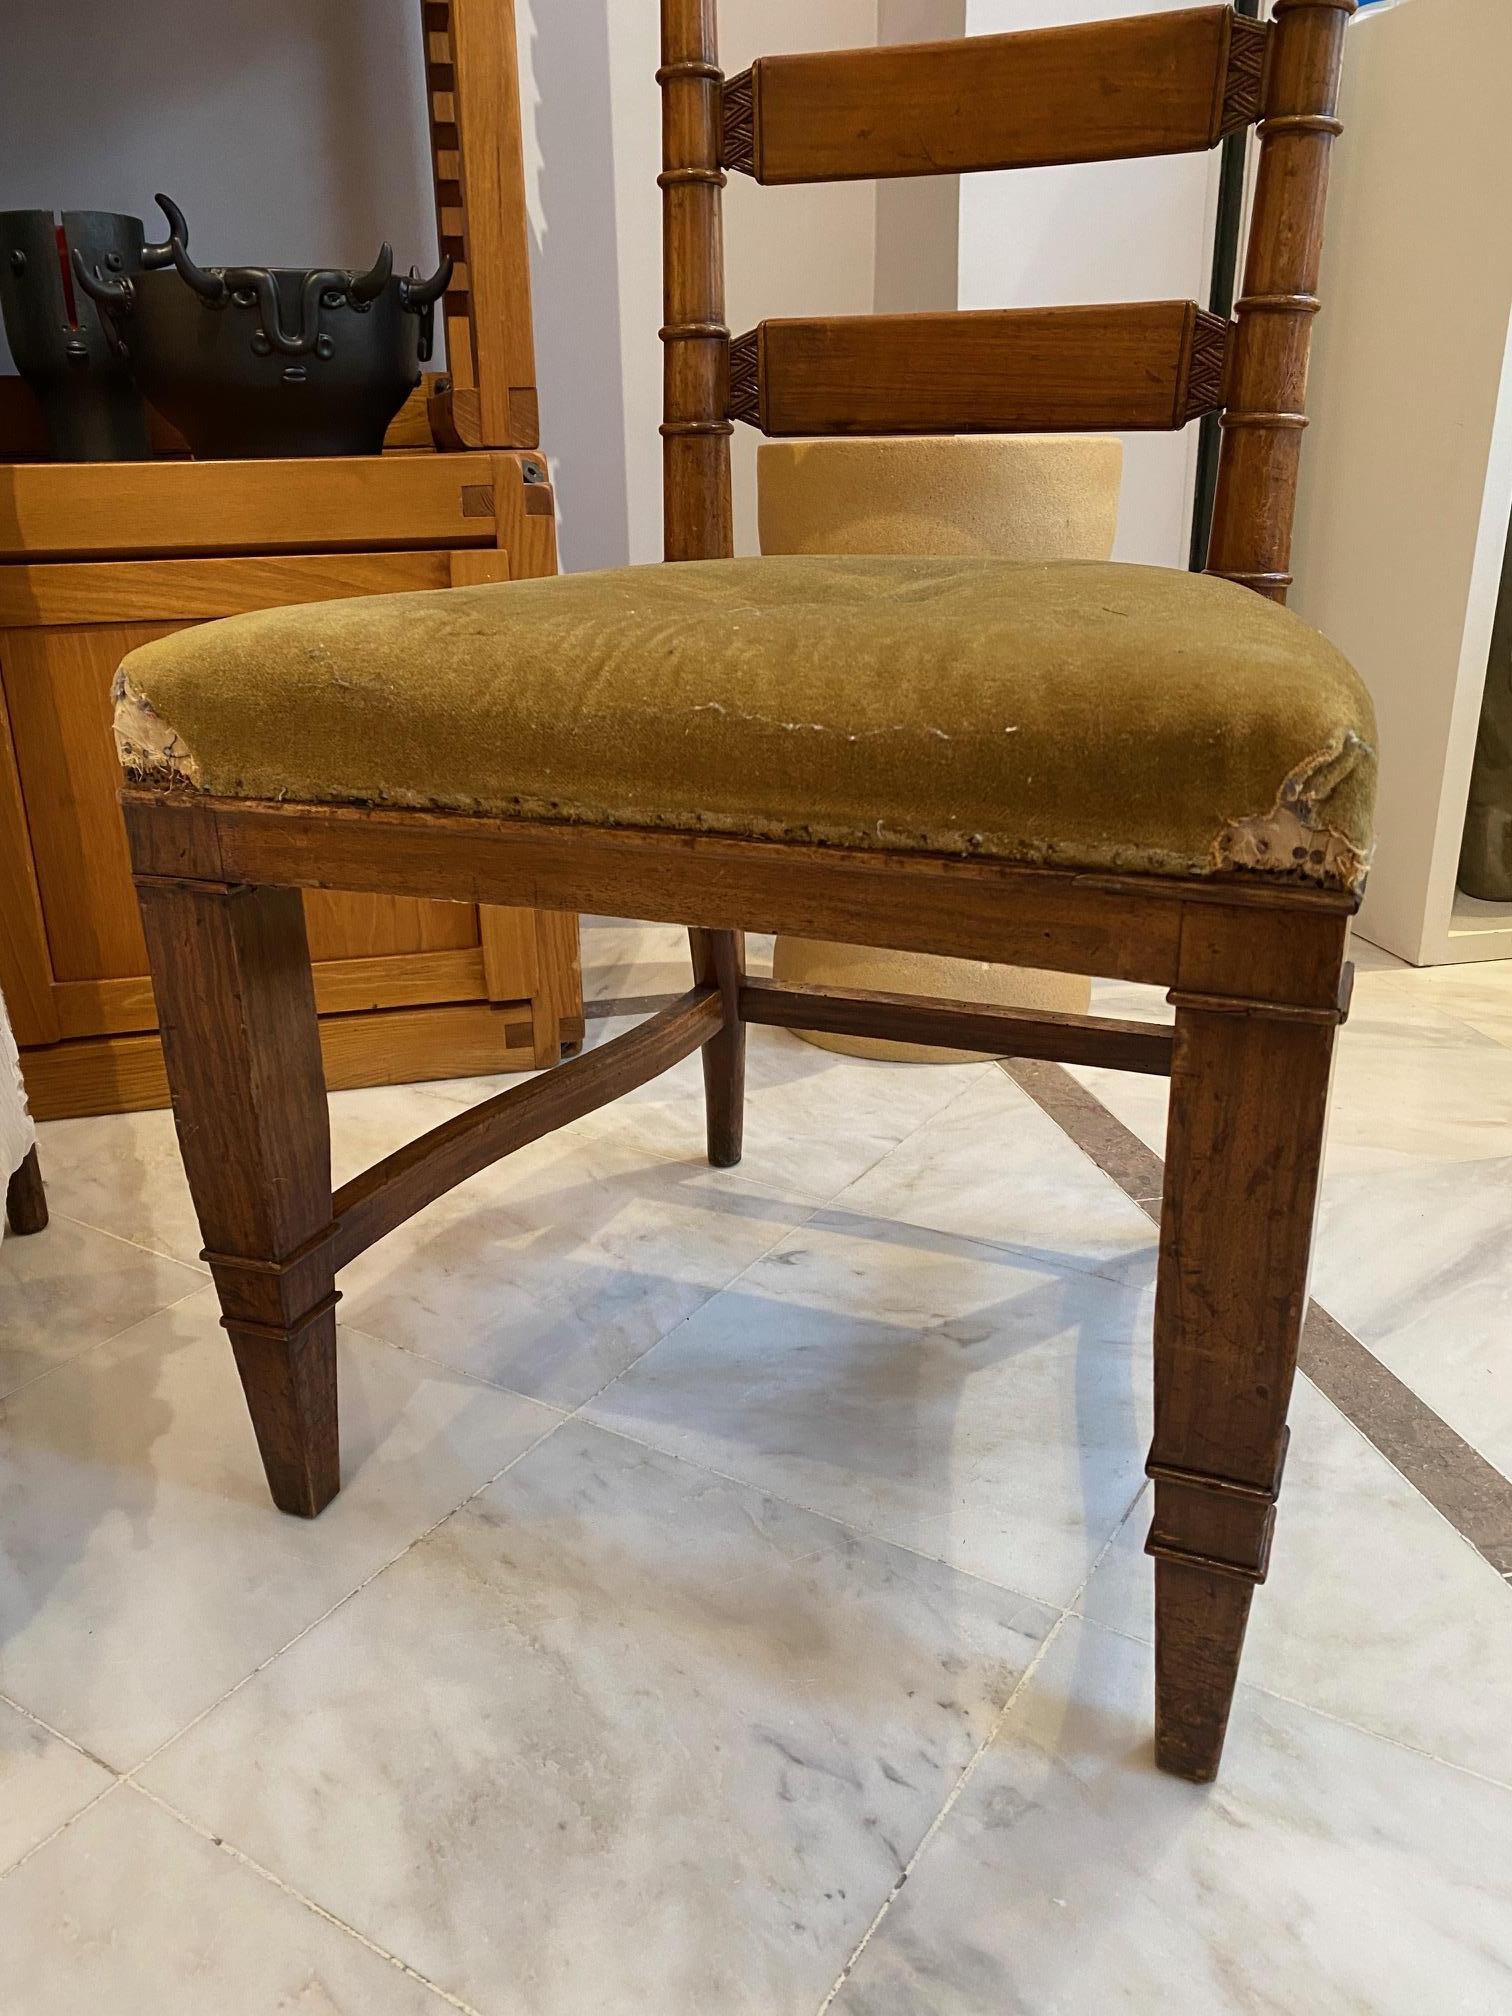 Tomaso Buzzi 1929 Pair of Wooden Structure Chairs For Sale 7